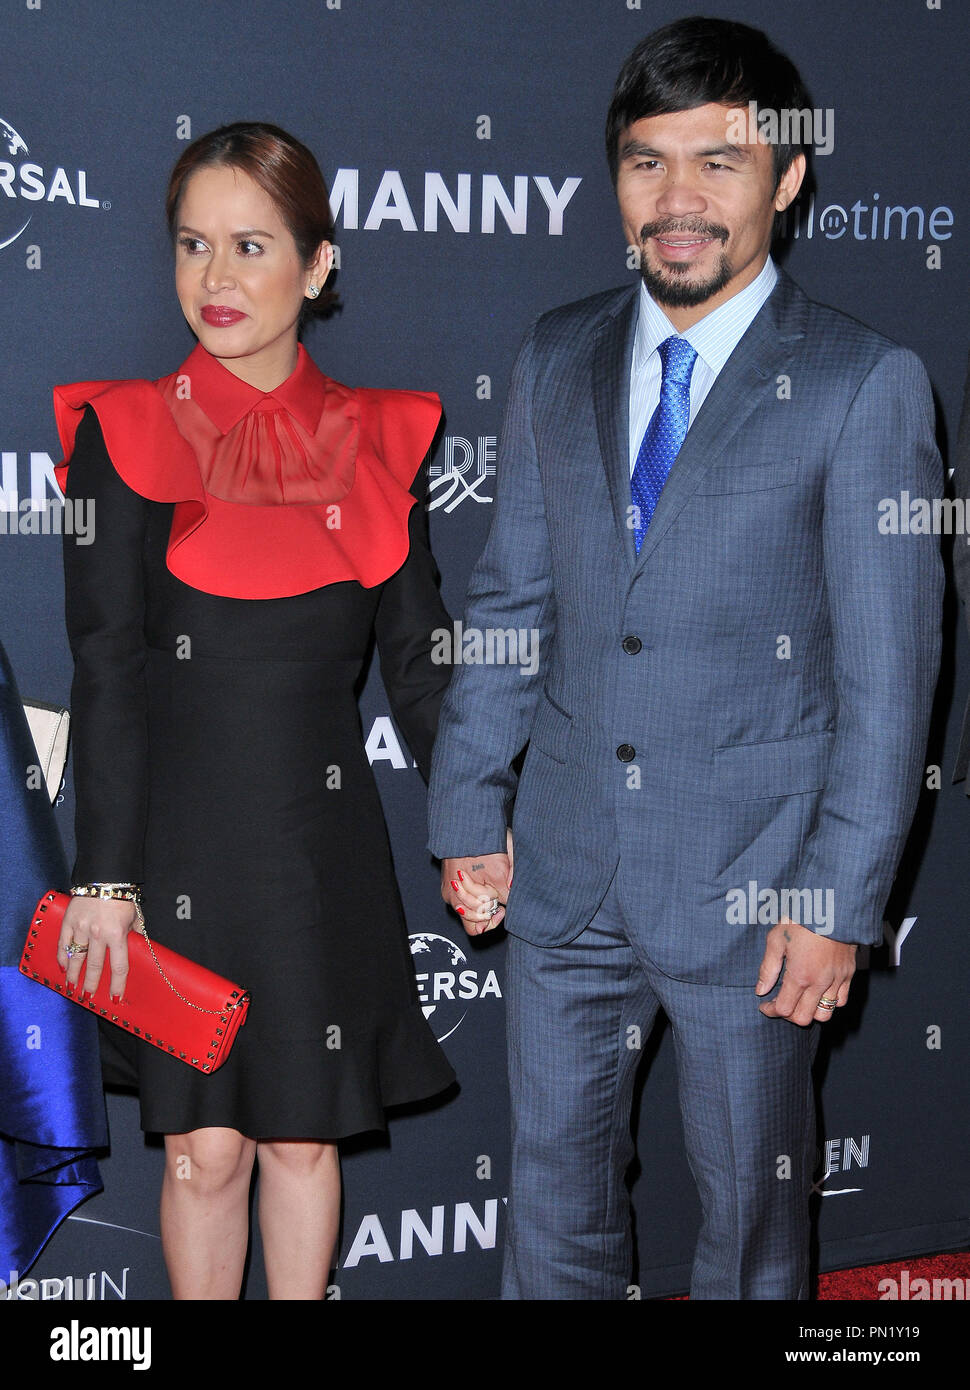 Jinkee Pacquiao & Manny Pacquiao at the 'Manny' Los Angeles Premiere held at the TCL Chinese Theatre in Hollywood, CA. The event took place on Tuesday, January 20, 2015. Photo by PRPP PRPP / PictureLux  File Reference # 32544 008PRPP01  For Editorial Use Only -  All Rights Reserved Stock Photo